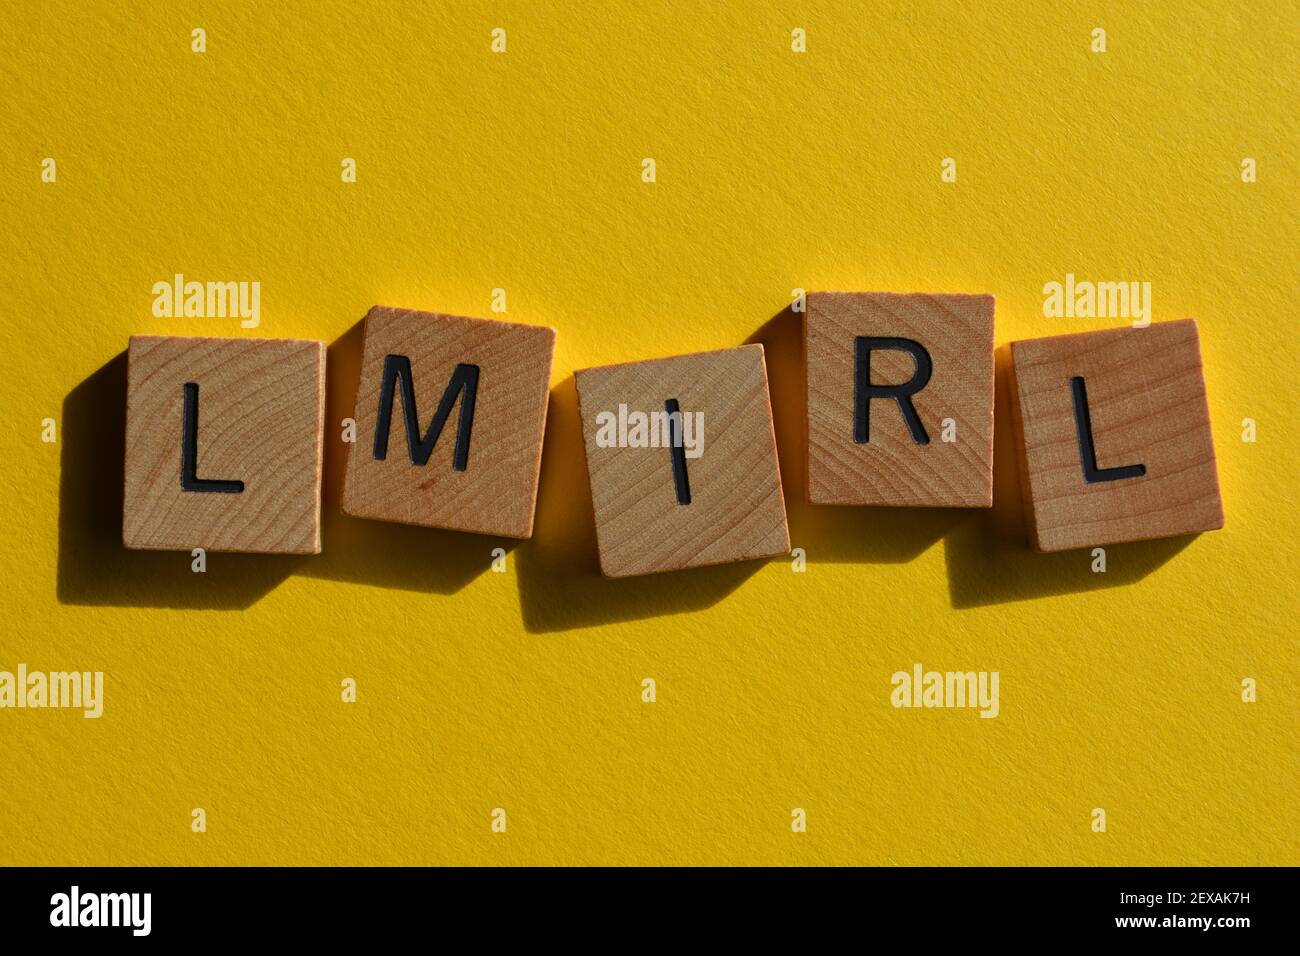 LMIRL acronym for Lets Meet In Real Life, used in texting Stock Photo